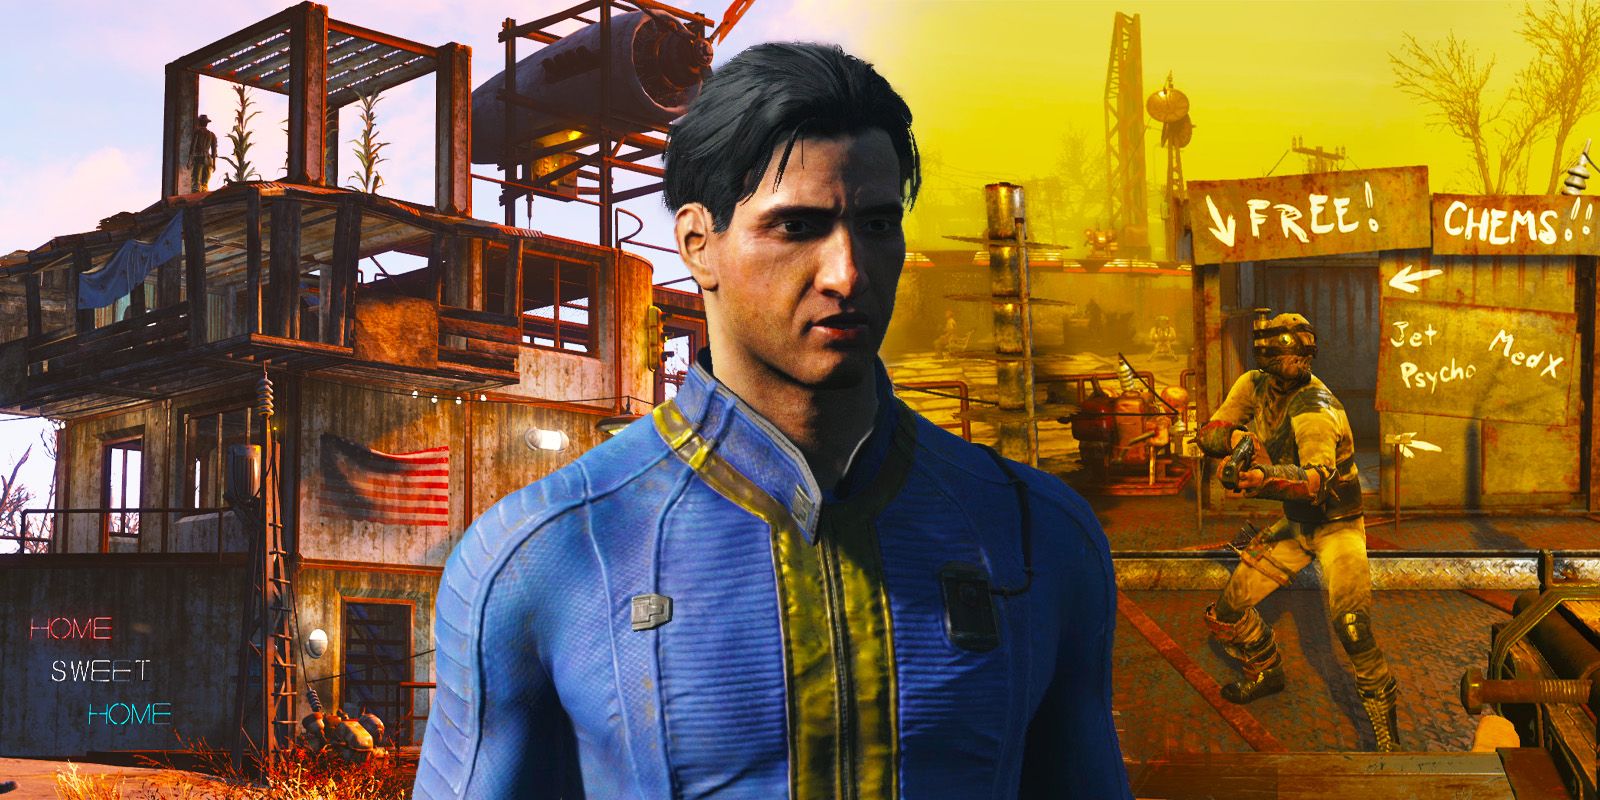 A character from Fallout 4 with Wasteland imagery